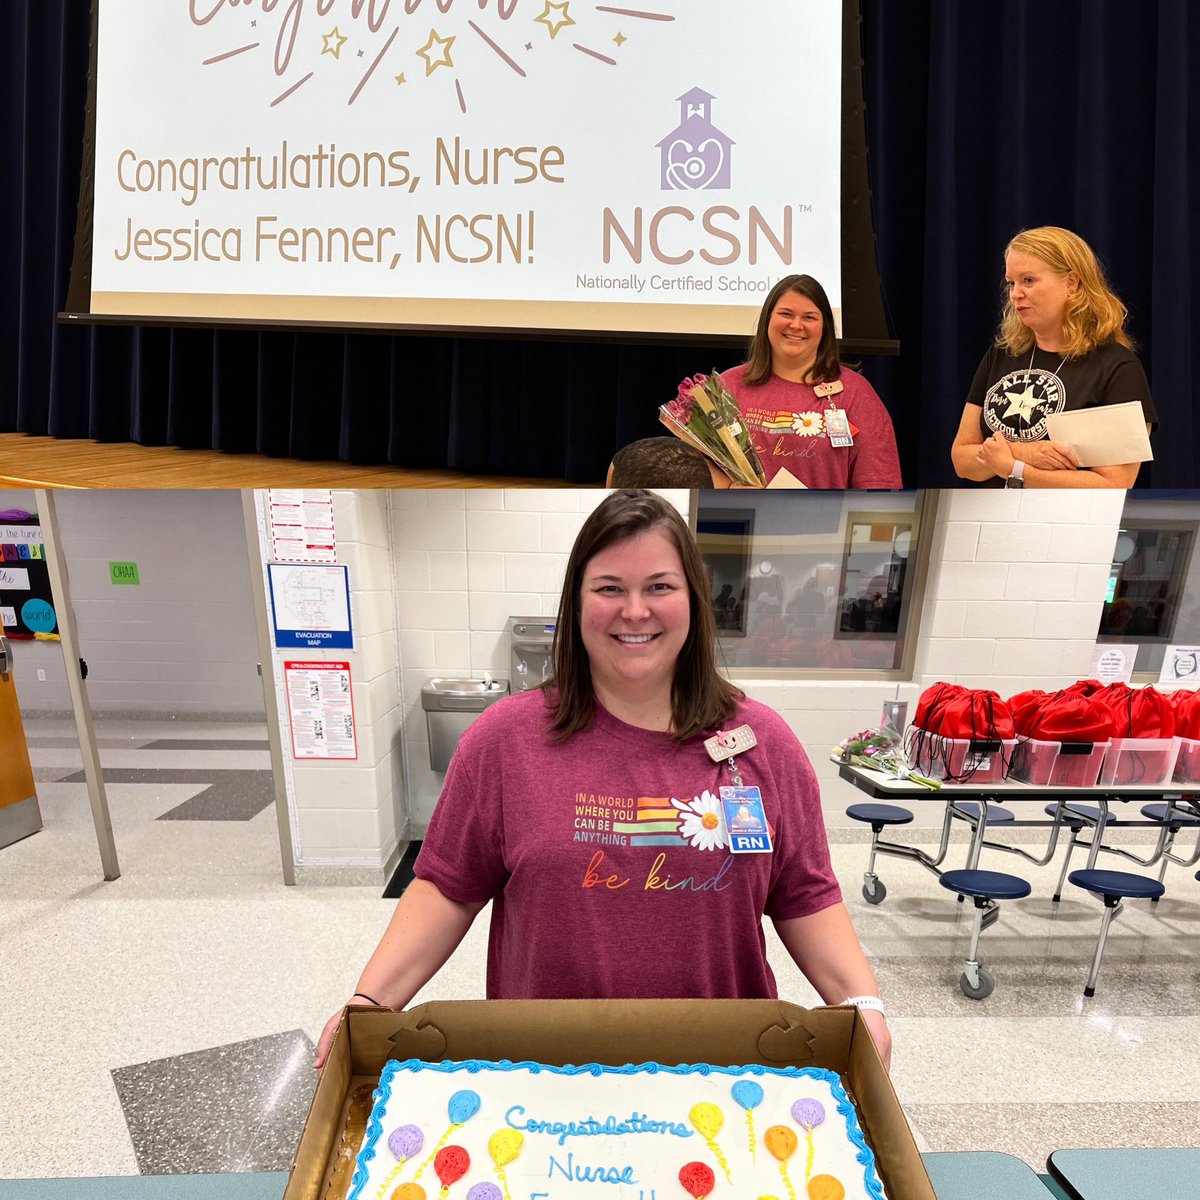 Congratulations Nurse Fenner! She is a trademarked credential, granted to registered nurses who meet educational, employment, and other criteria, and who have successfully passed the national examination managed by the National Board for Certification of School Nurses (NBCSN).